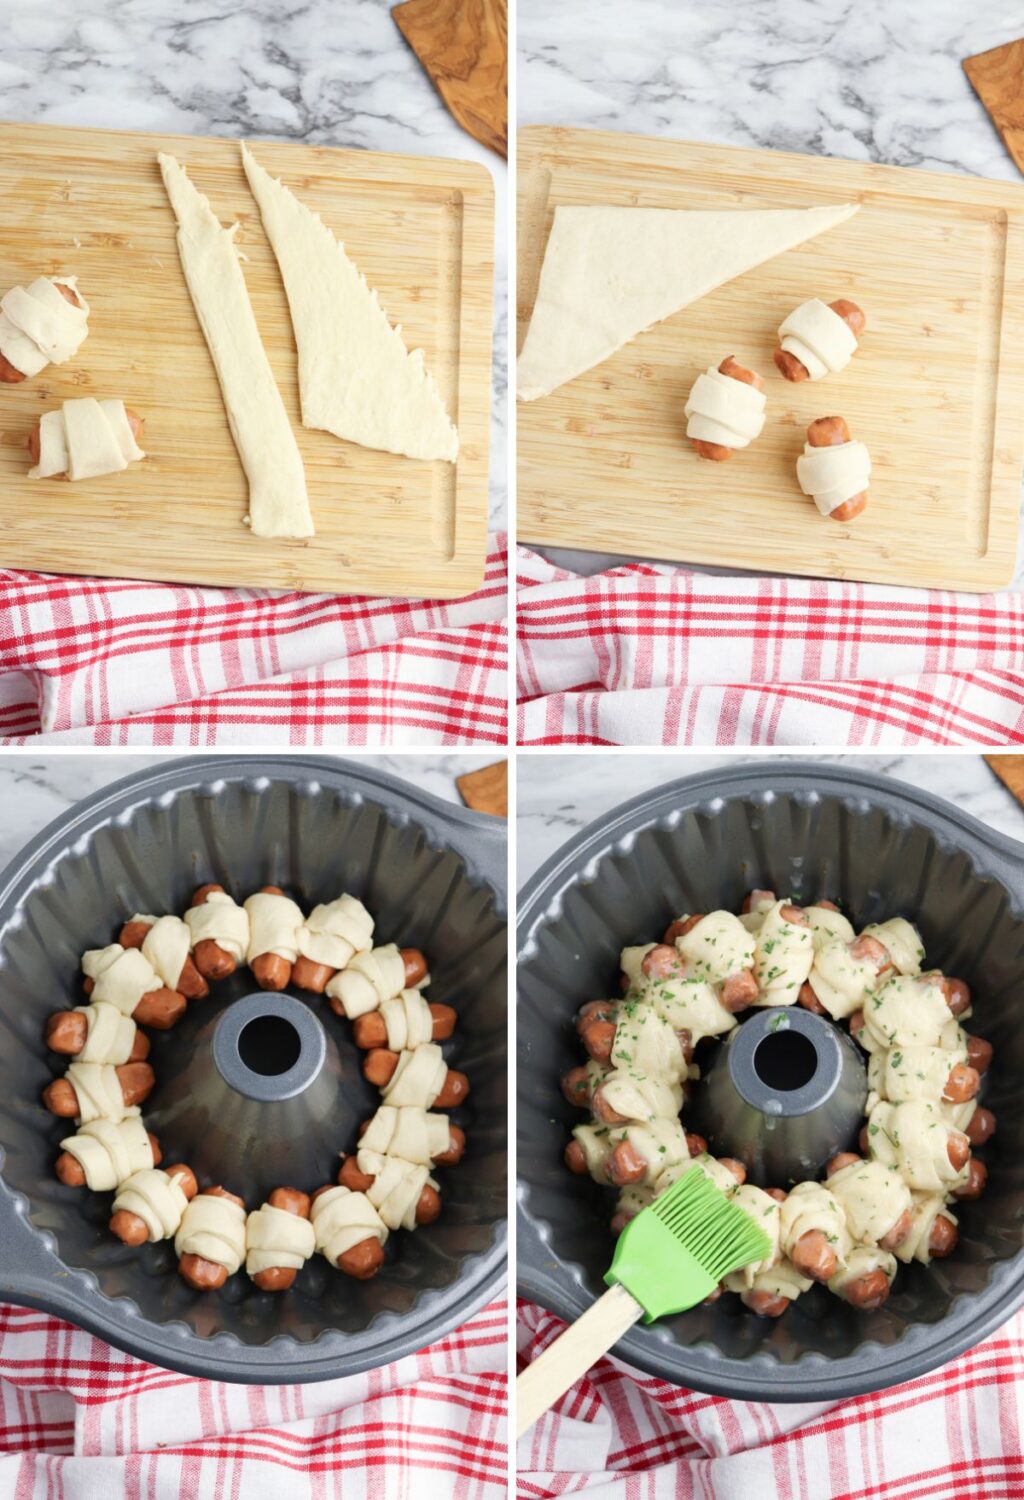 How to make a hot dog wreath in a muffin tin.